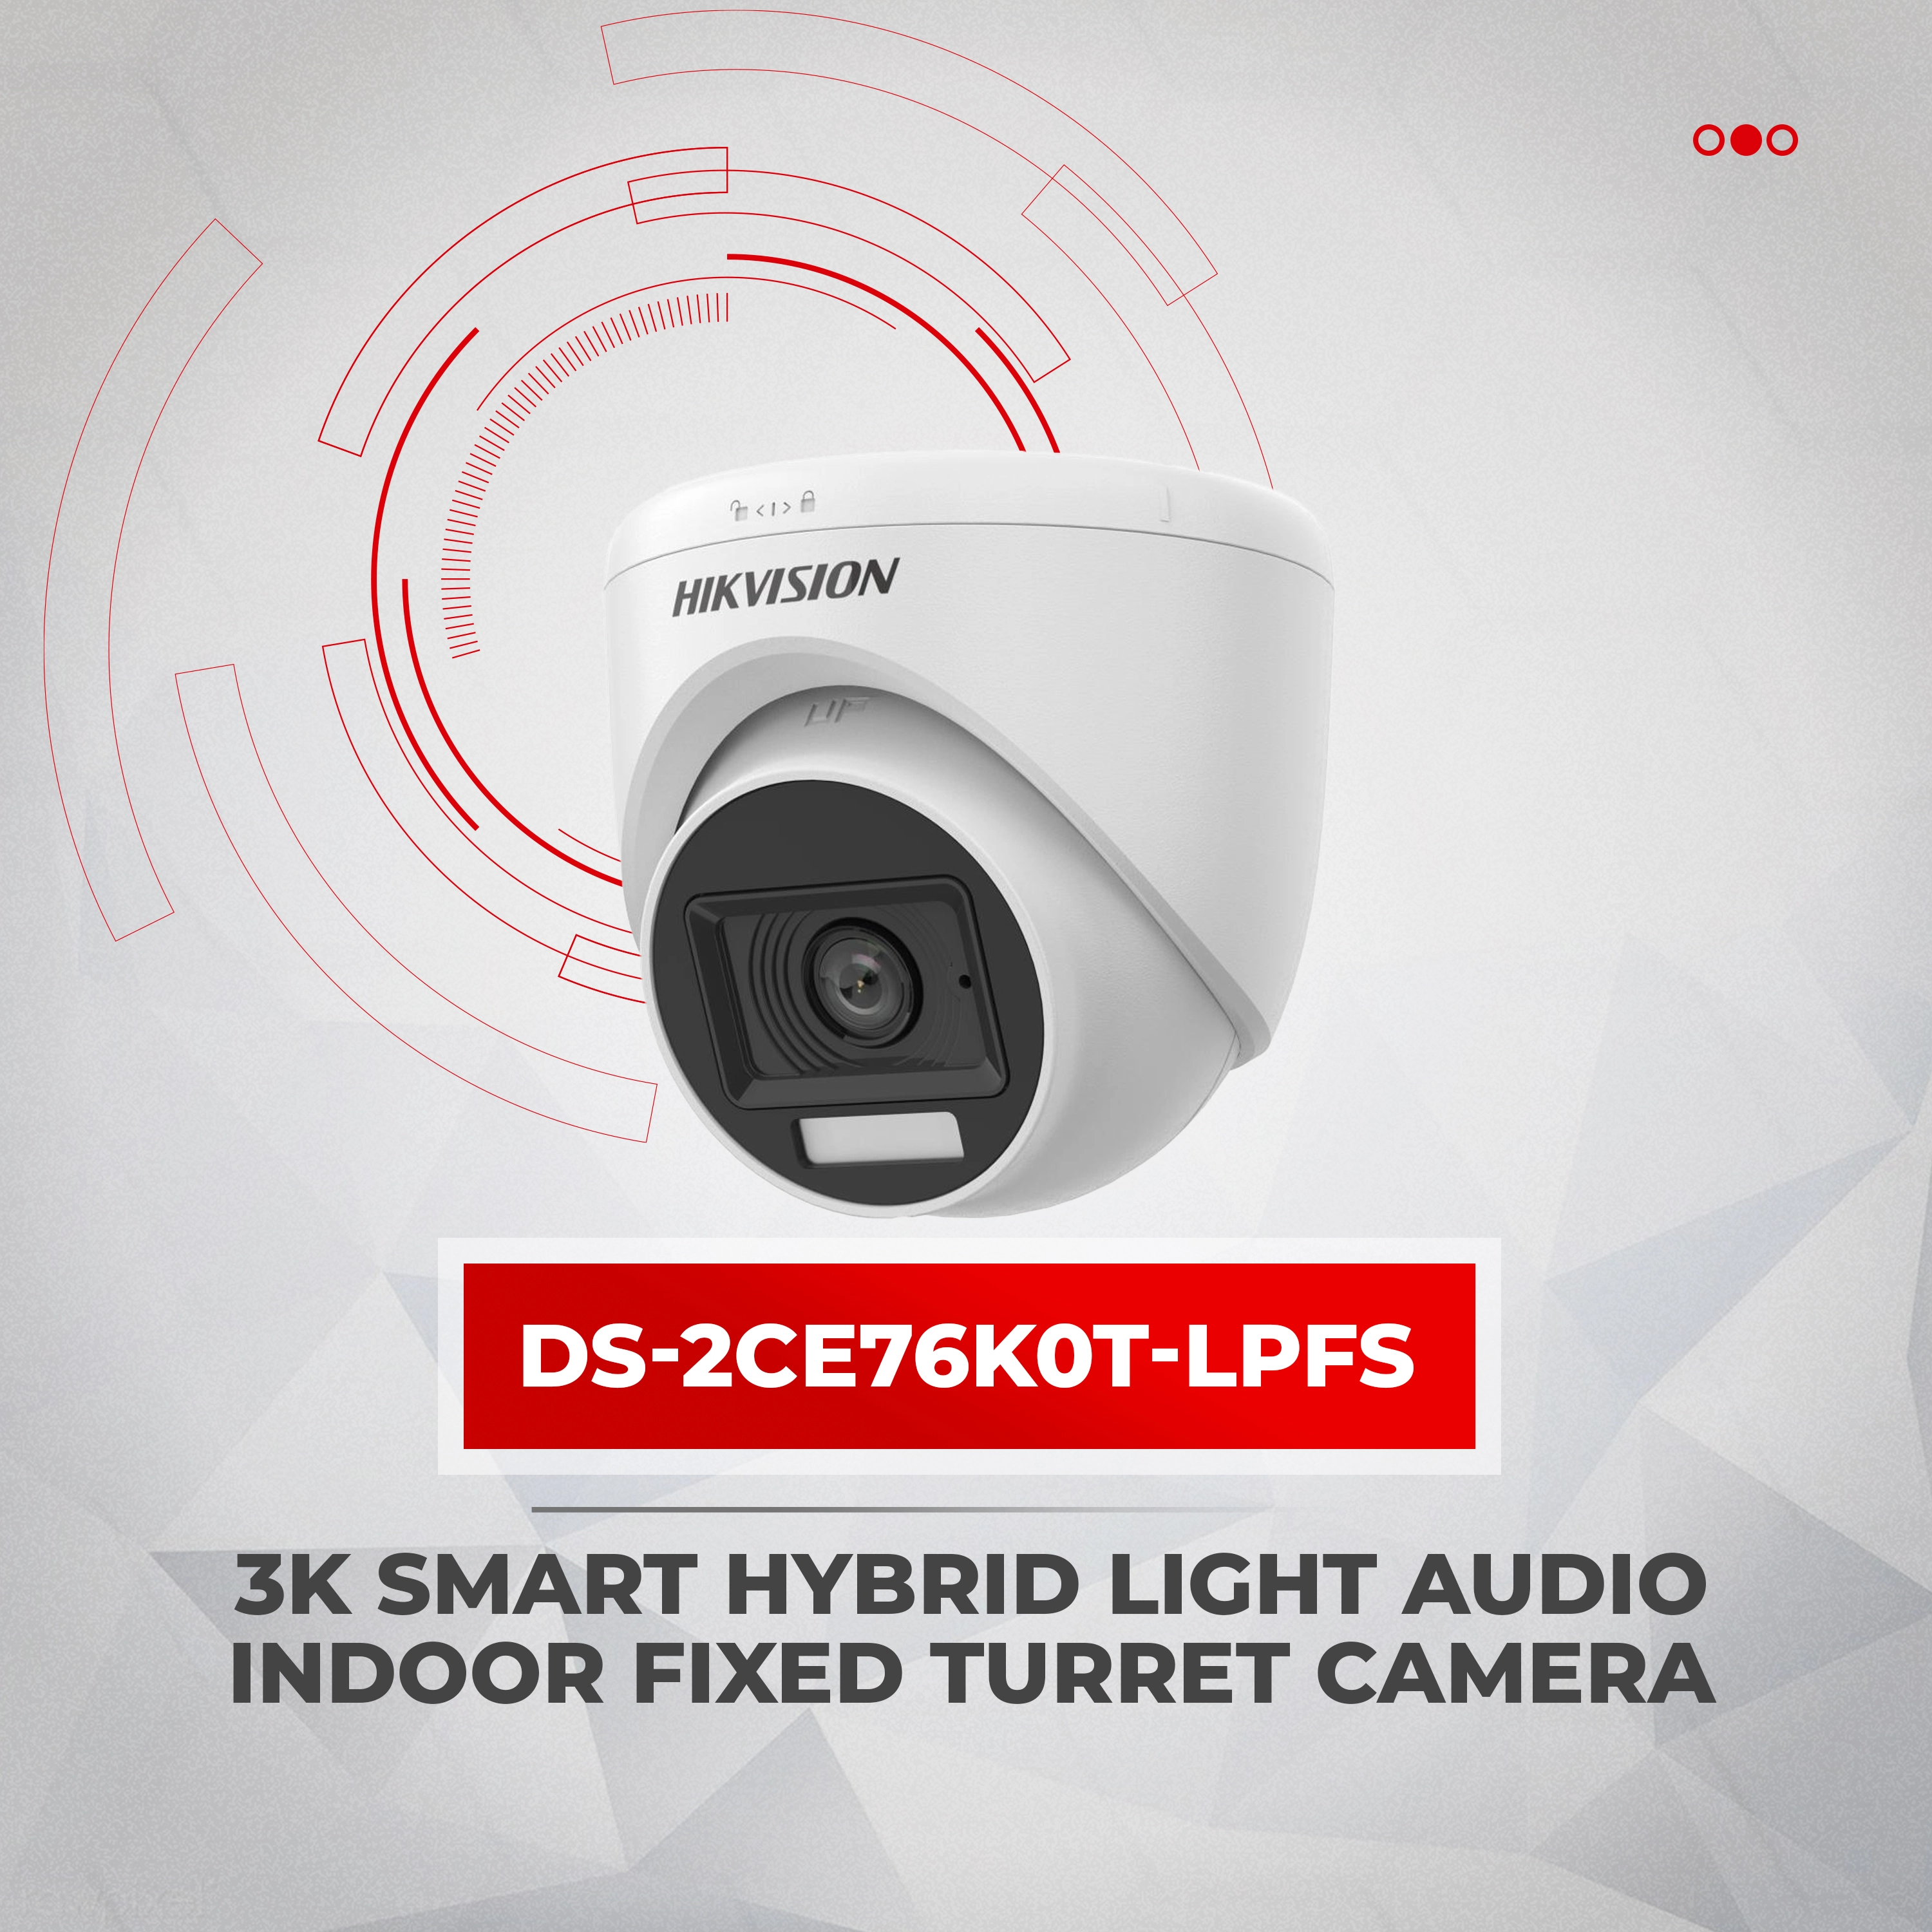 Cctv ds-2ce76k0t-lfps dome camera for cctv security camera systems 